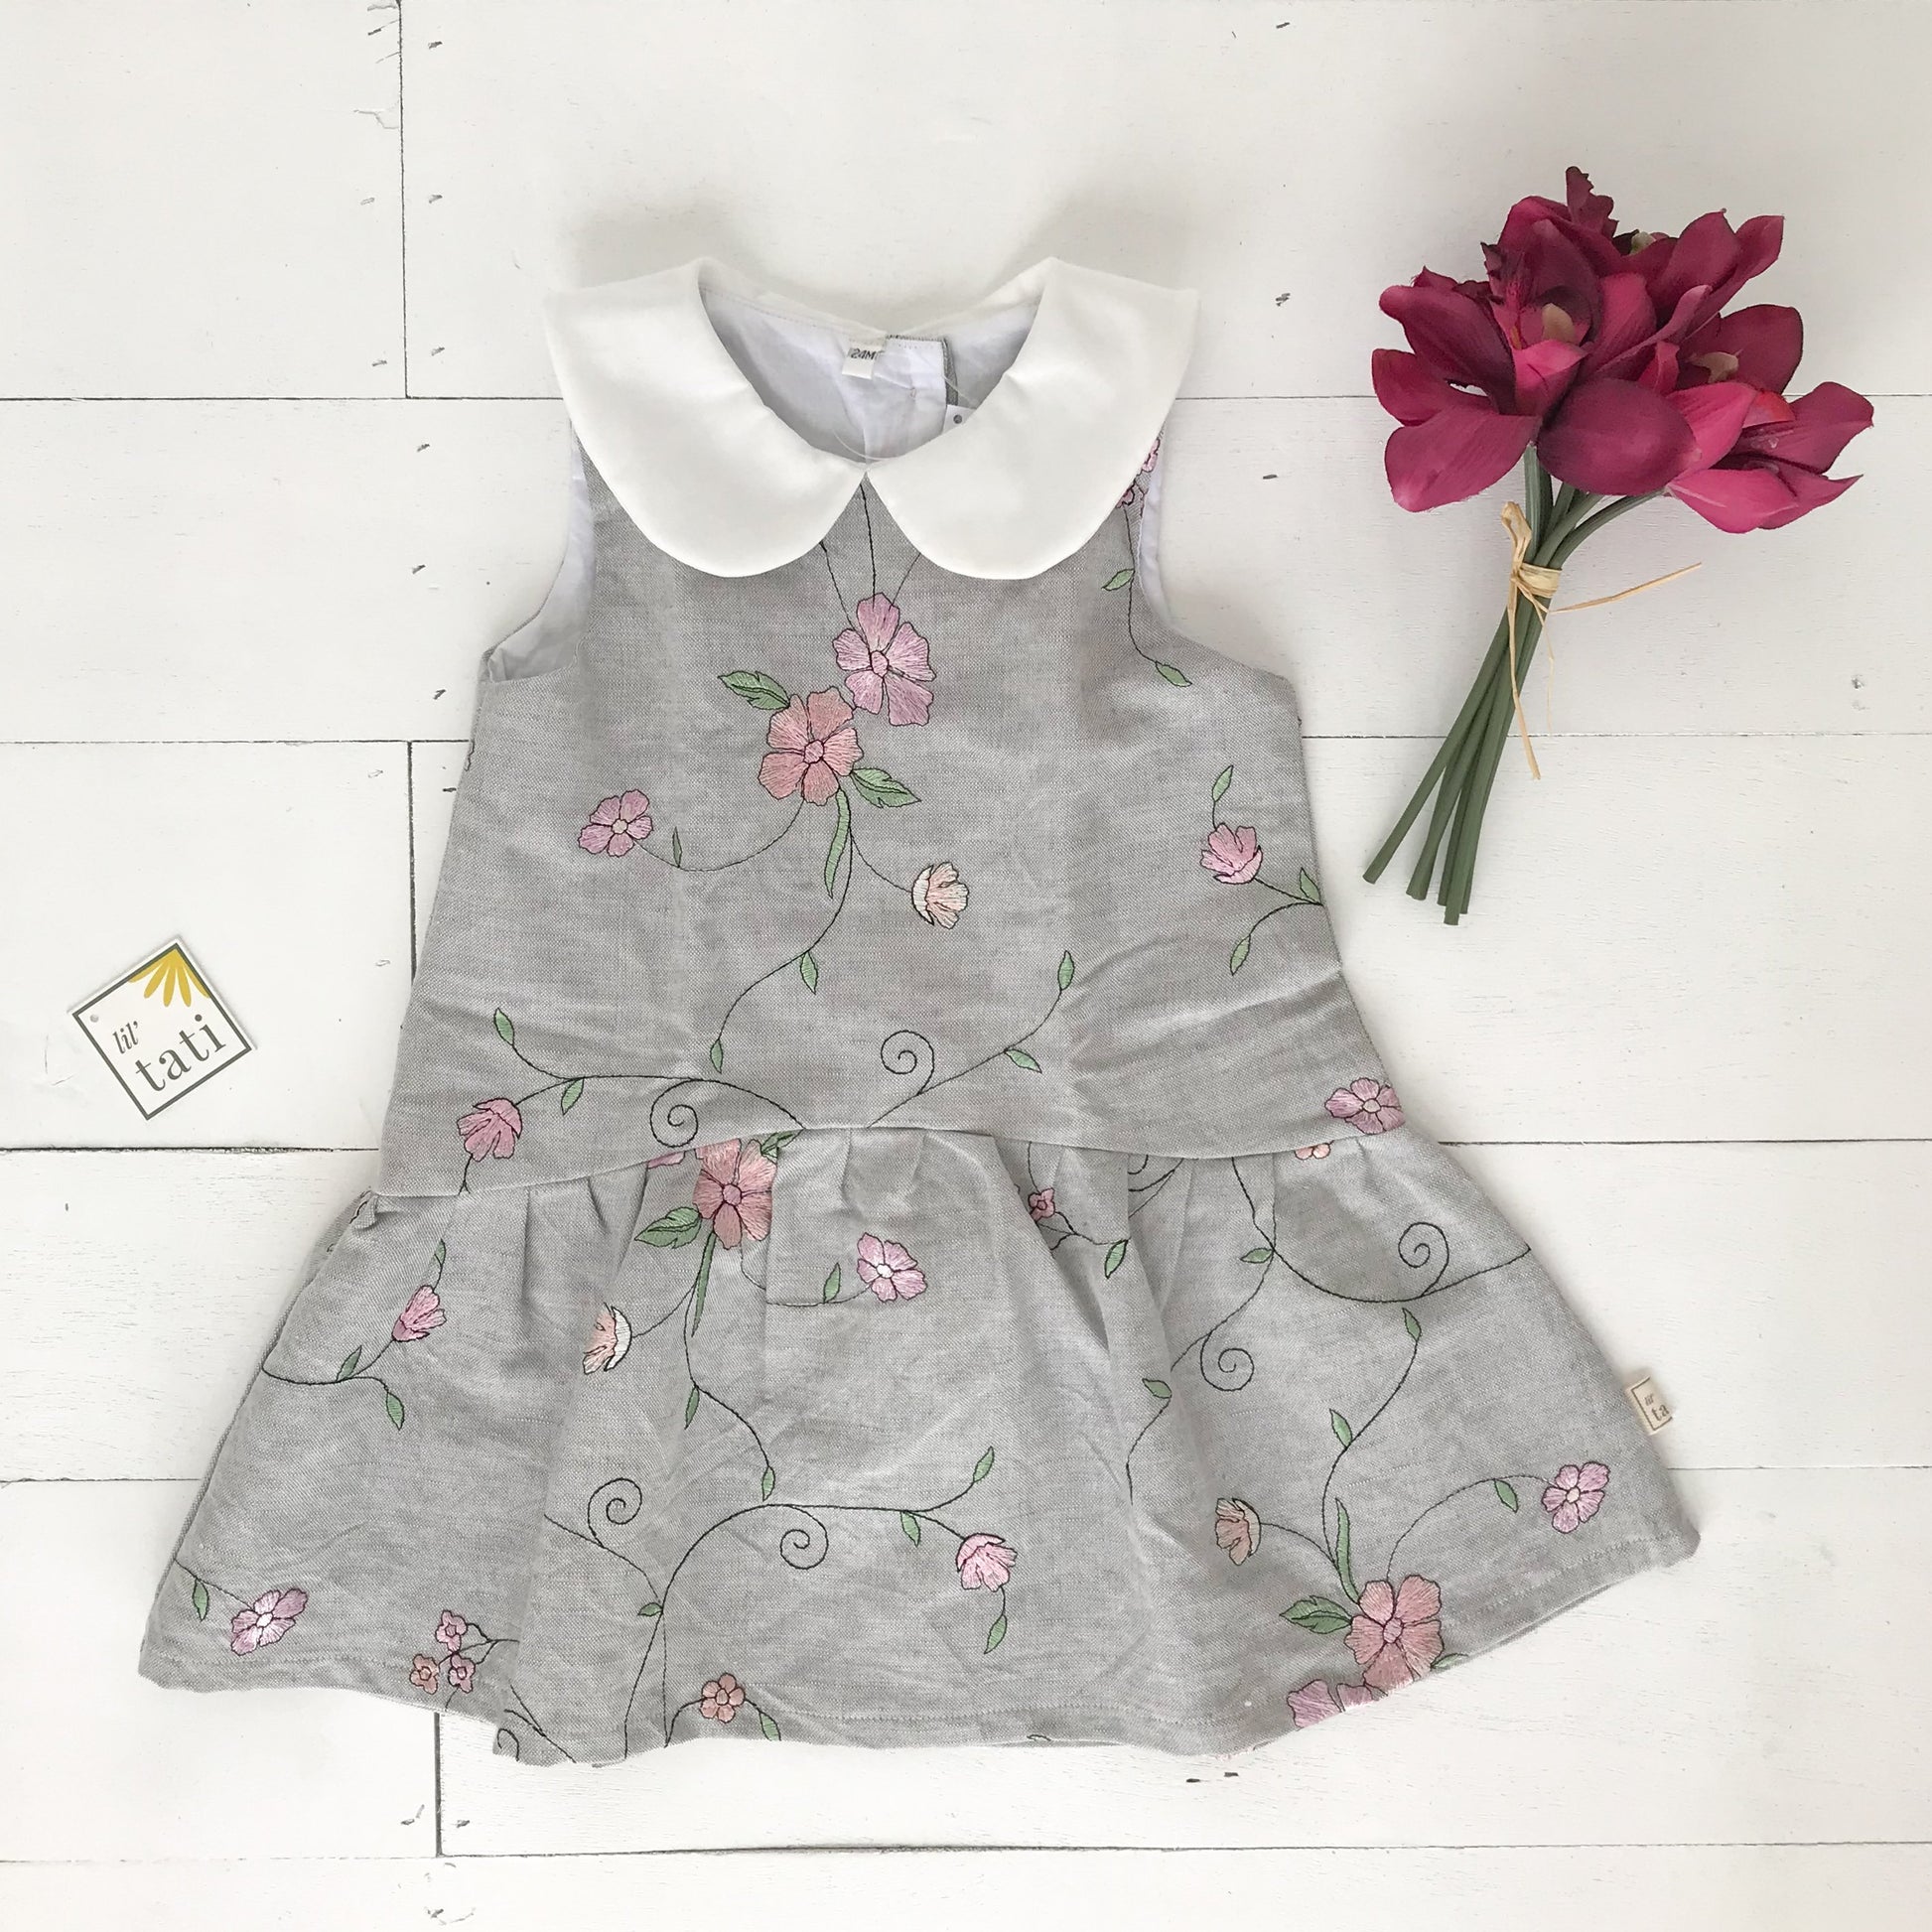 Daisy Dress in Floral Vine Embroidery - Lil' Tati